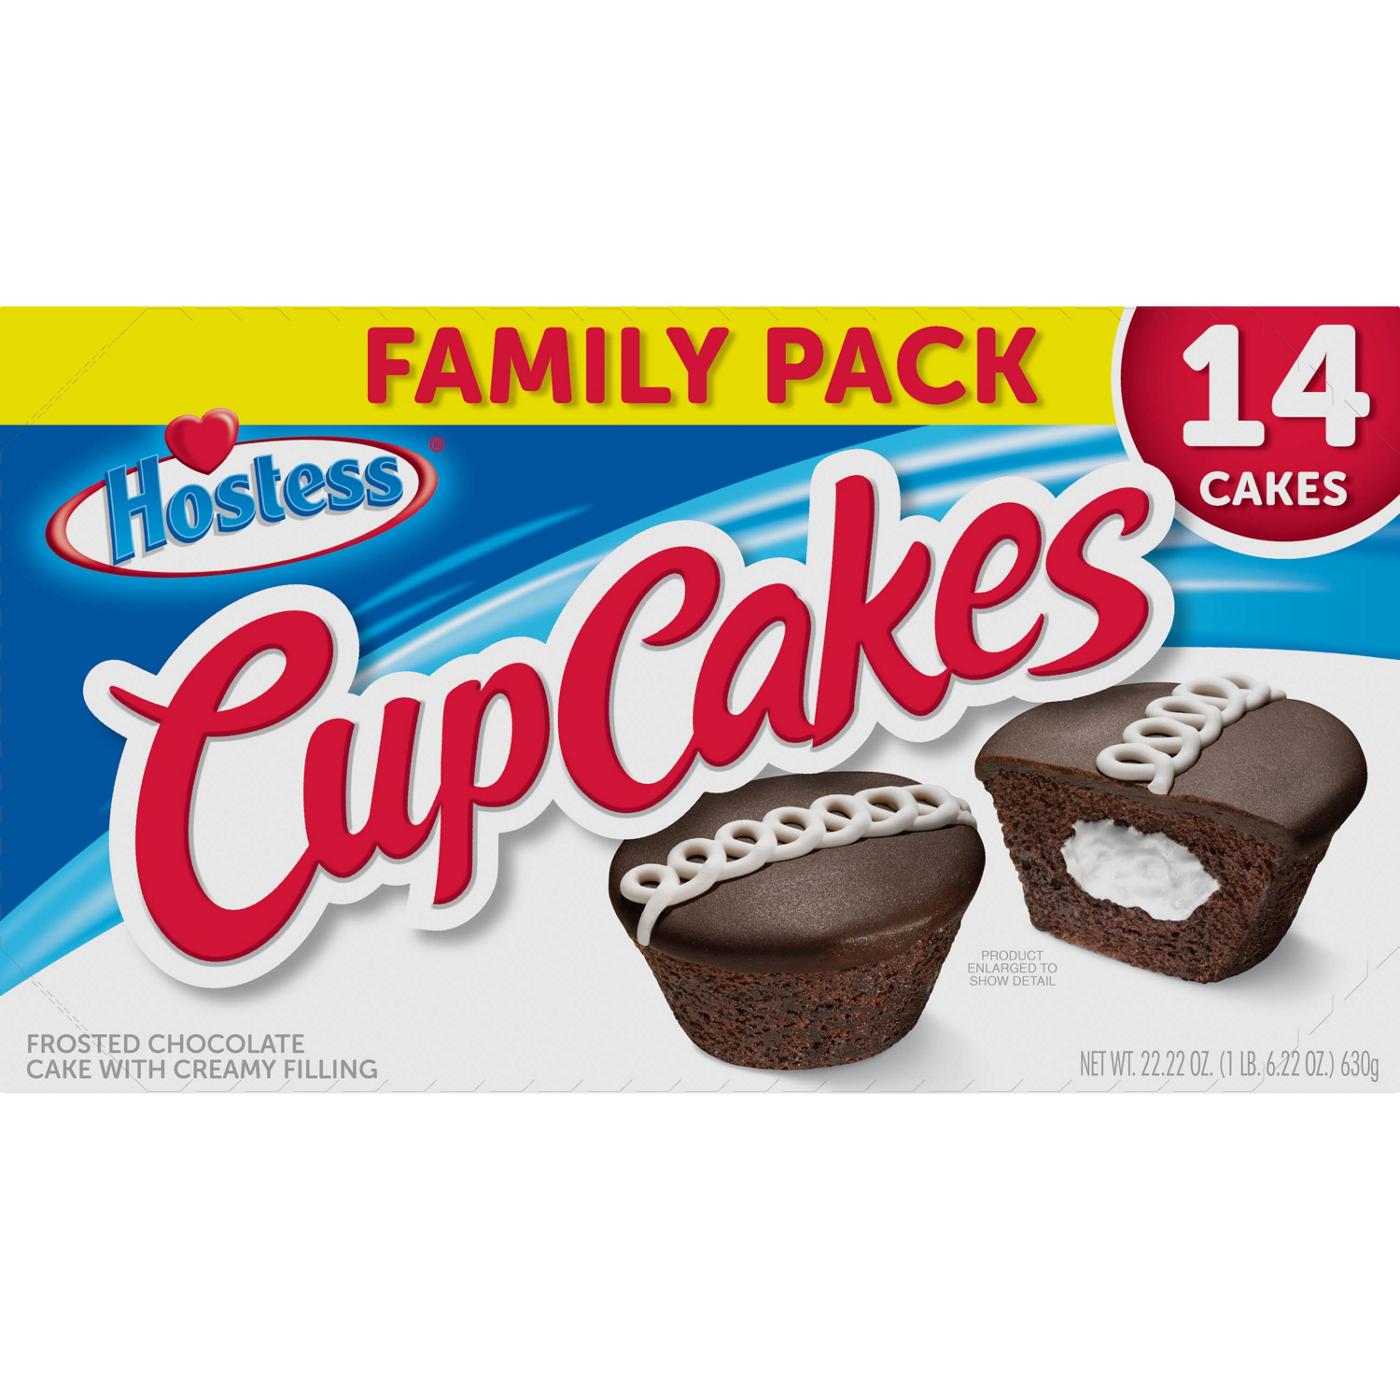 Hostess Chocolate Cupcakes - Family Pack; image 1 of 4